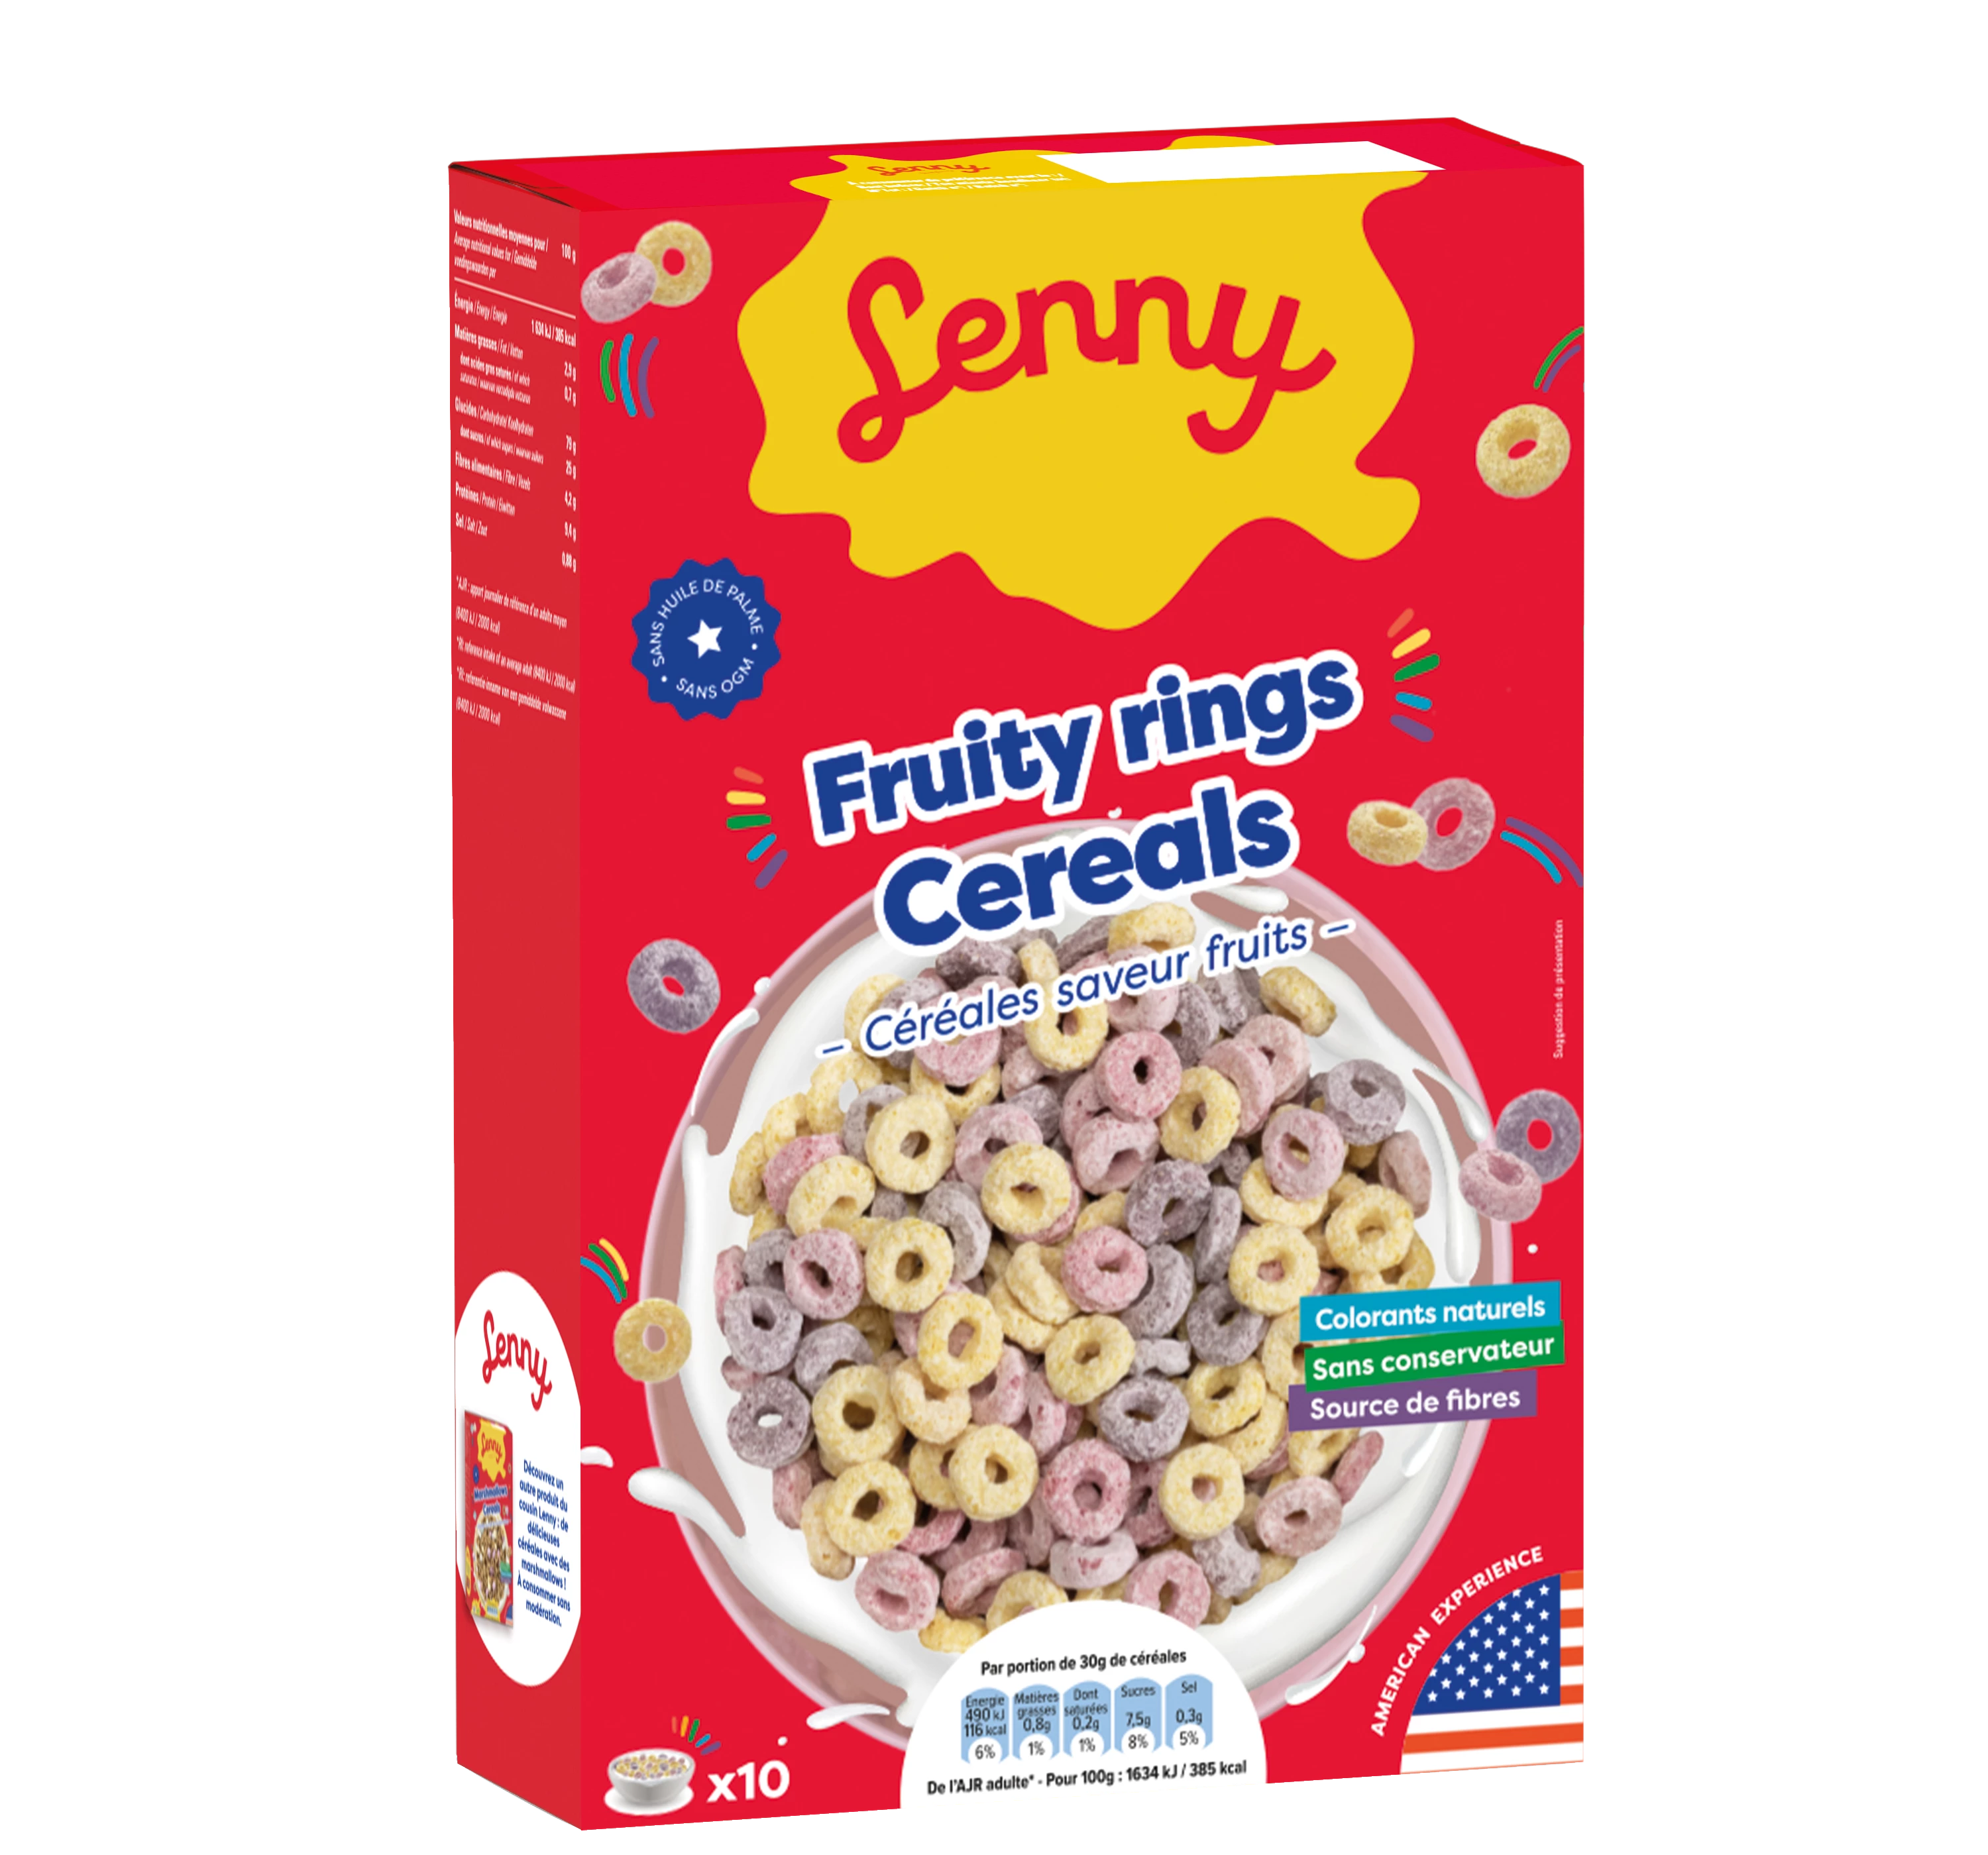 Fruity Rings Cereals, 12x300 g- LENNY